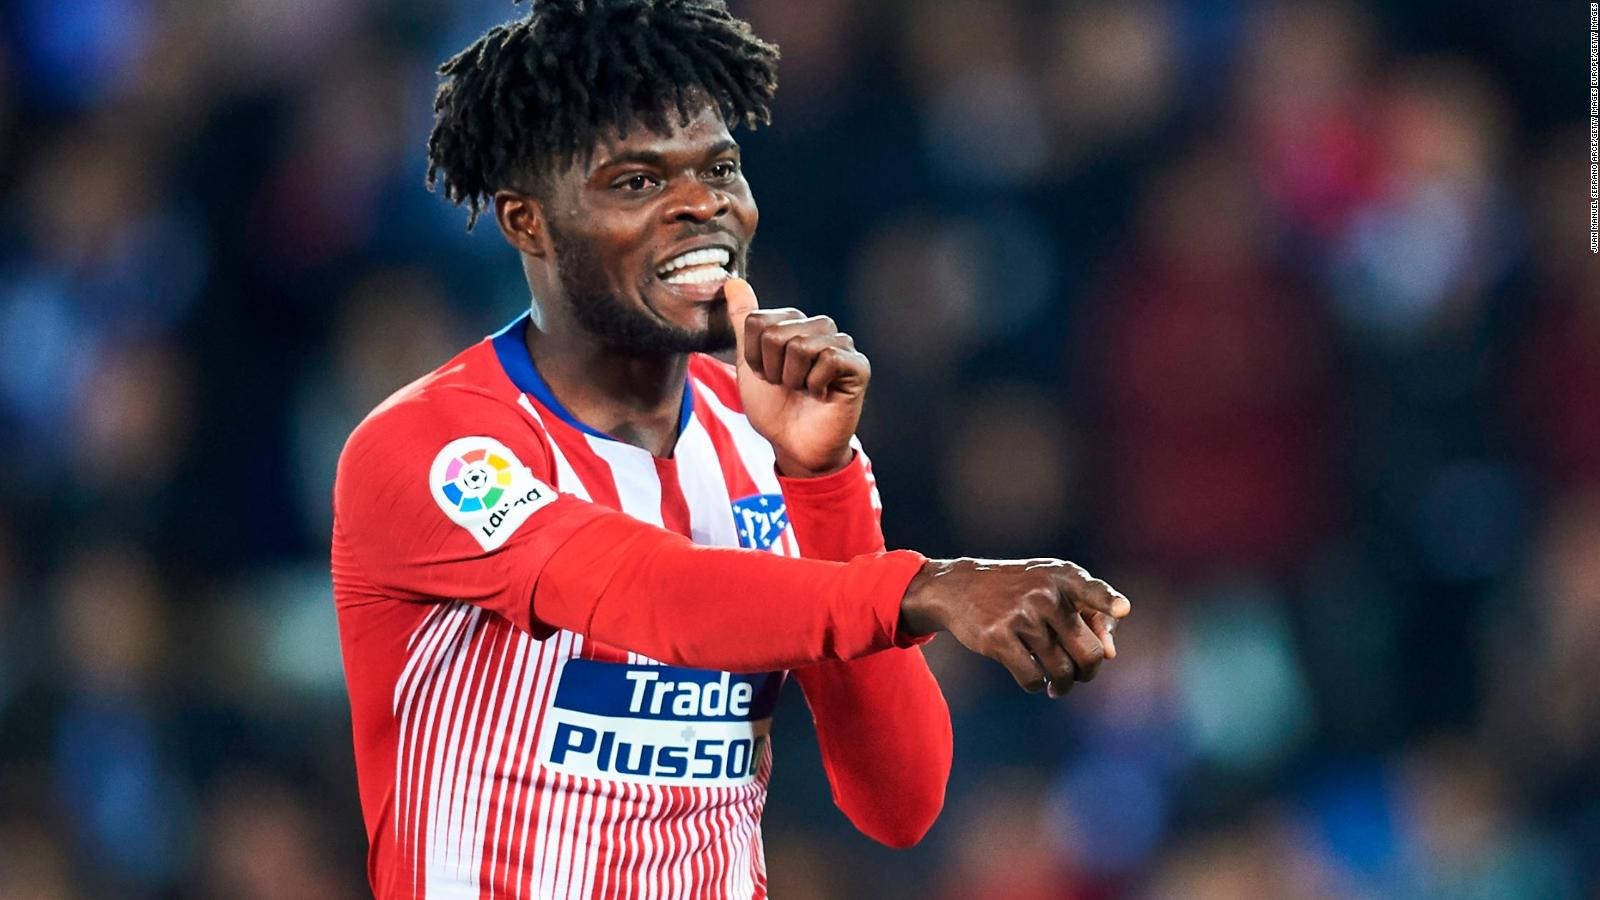 Top 999+ Thomas Partey Wallpapers Full HD, 4K✅Free to Use